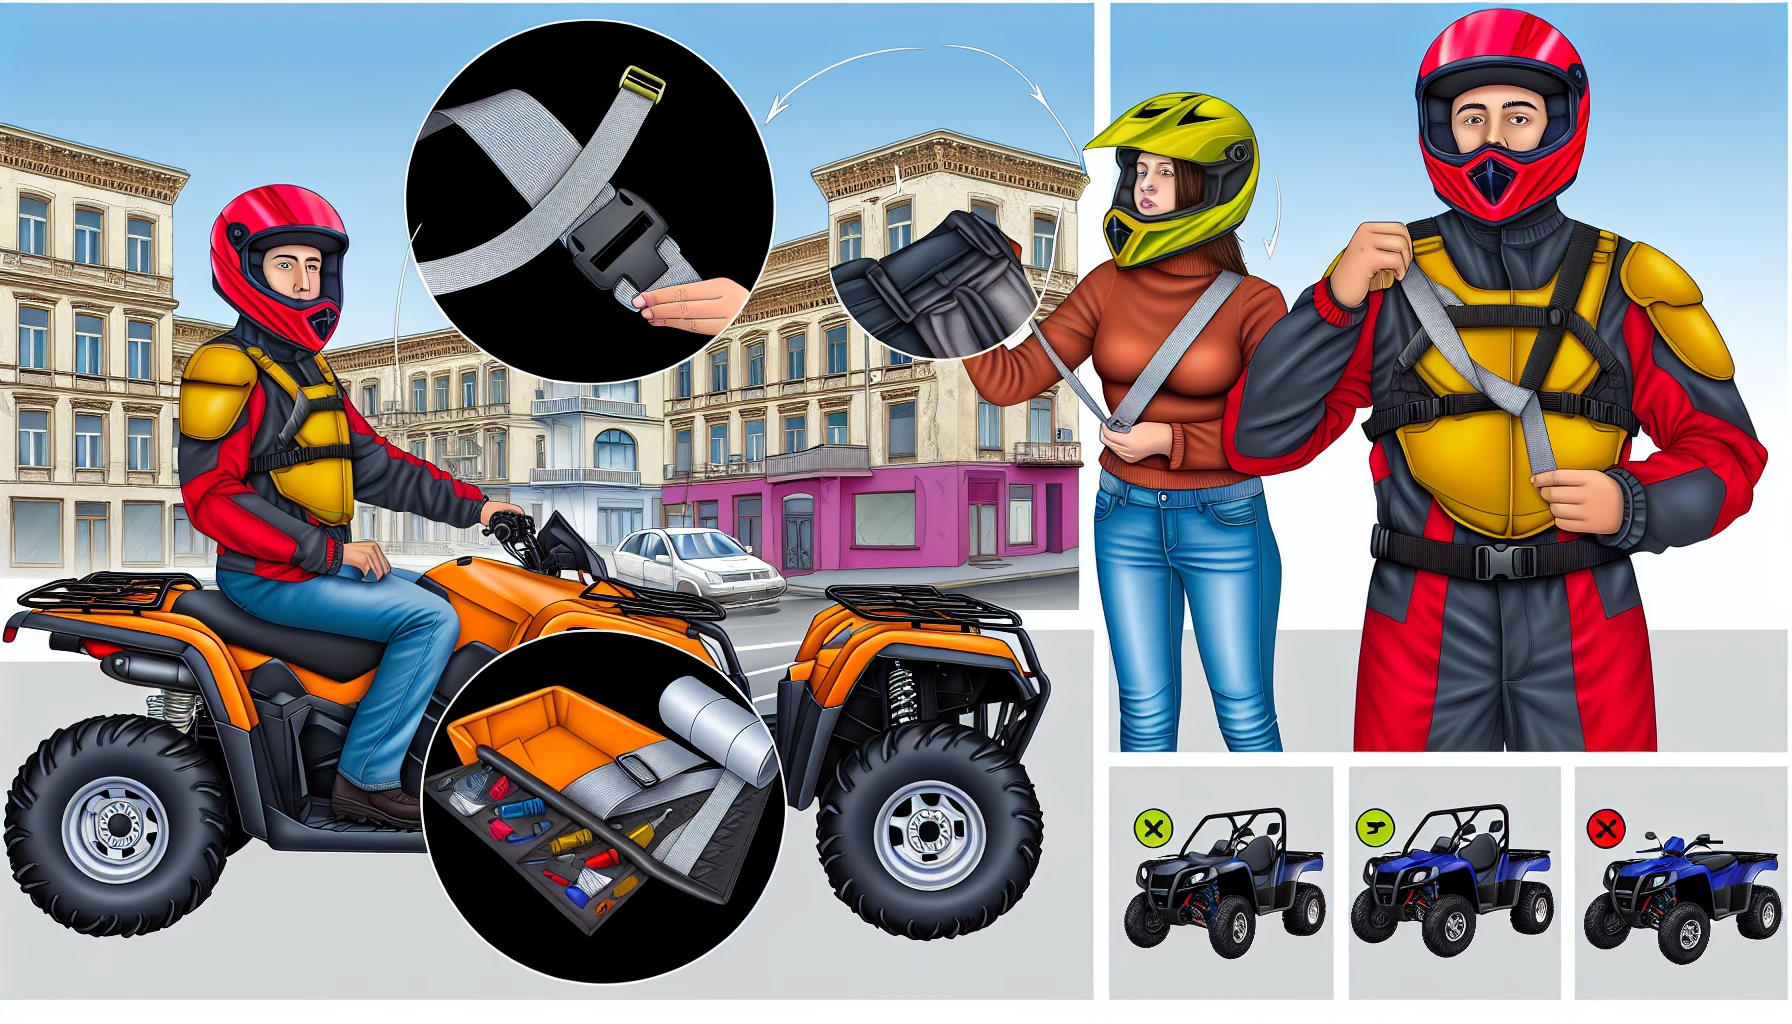 ATV safety features